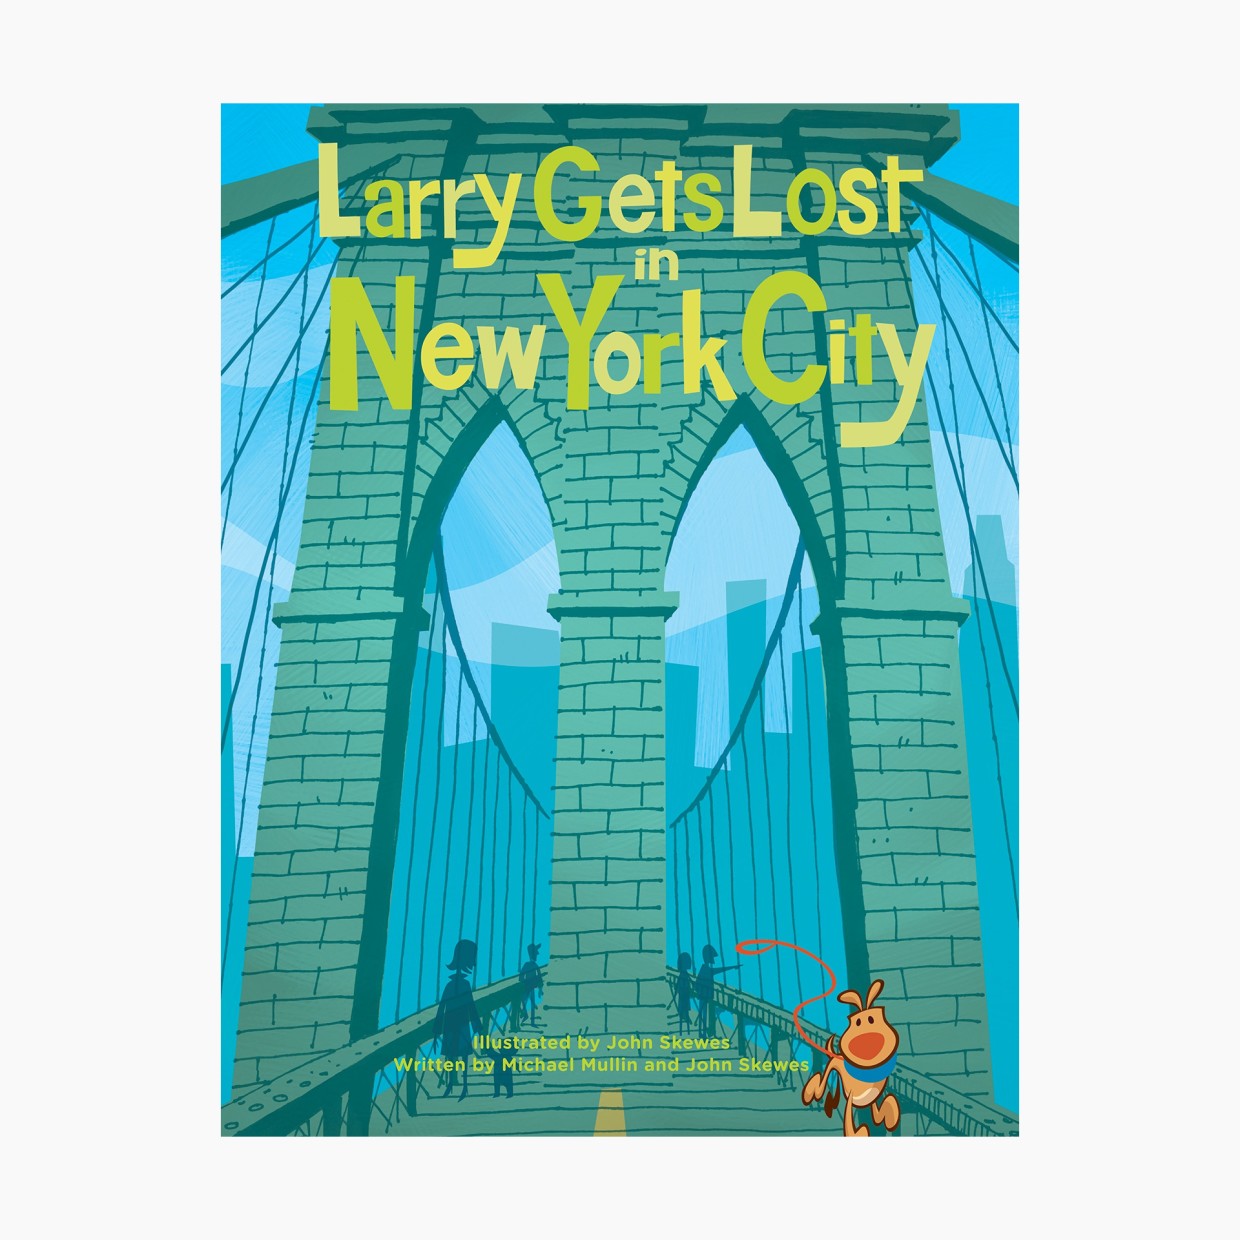 Larry Gets Lost in New York City.